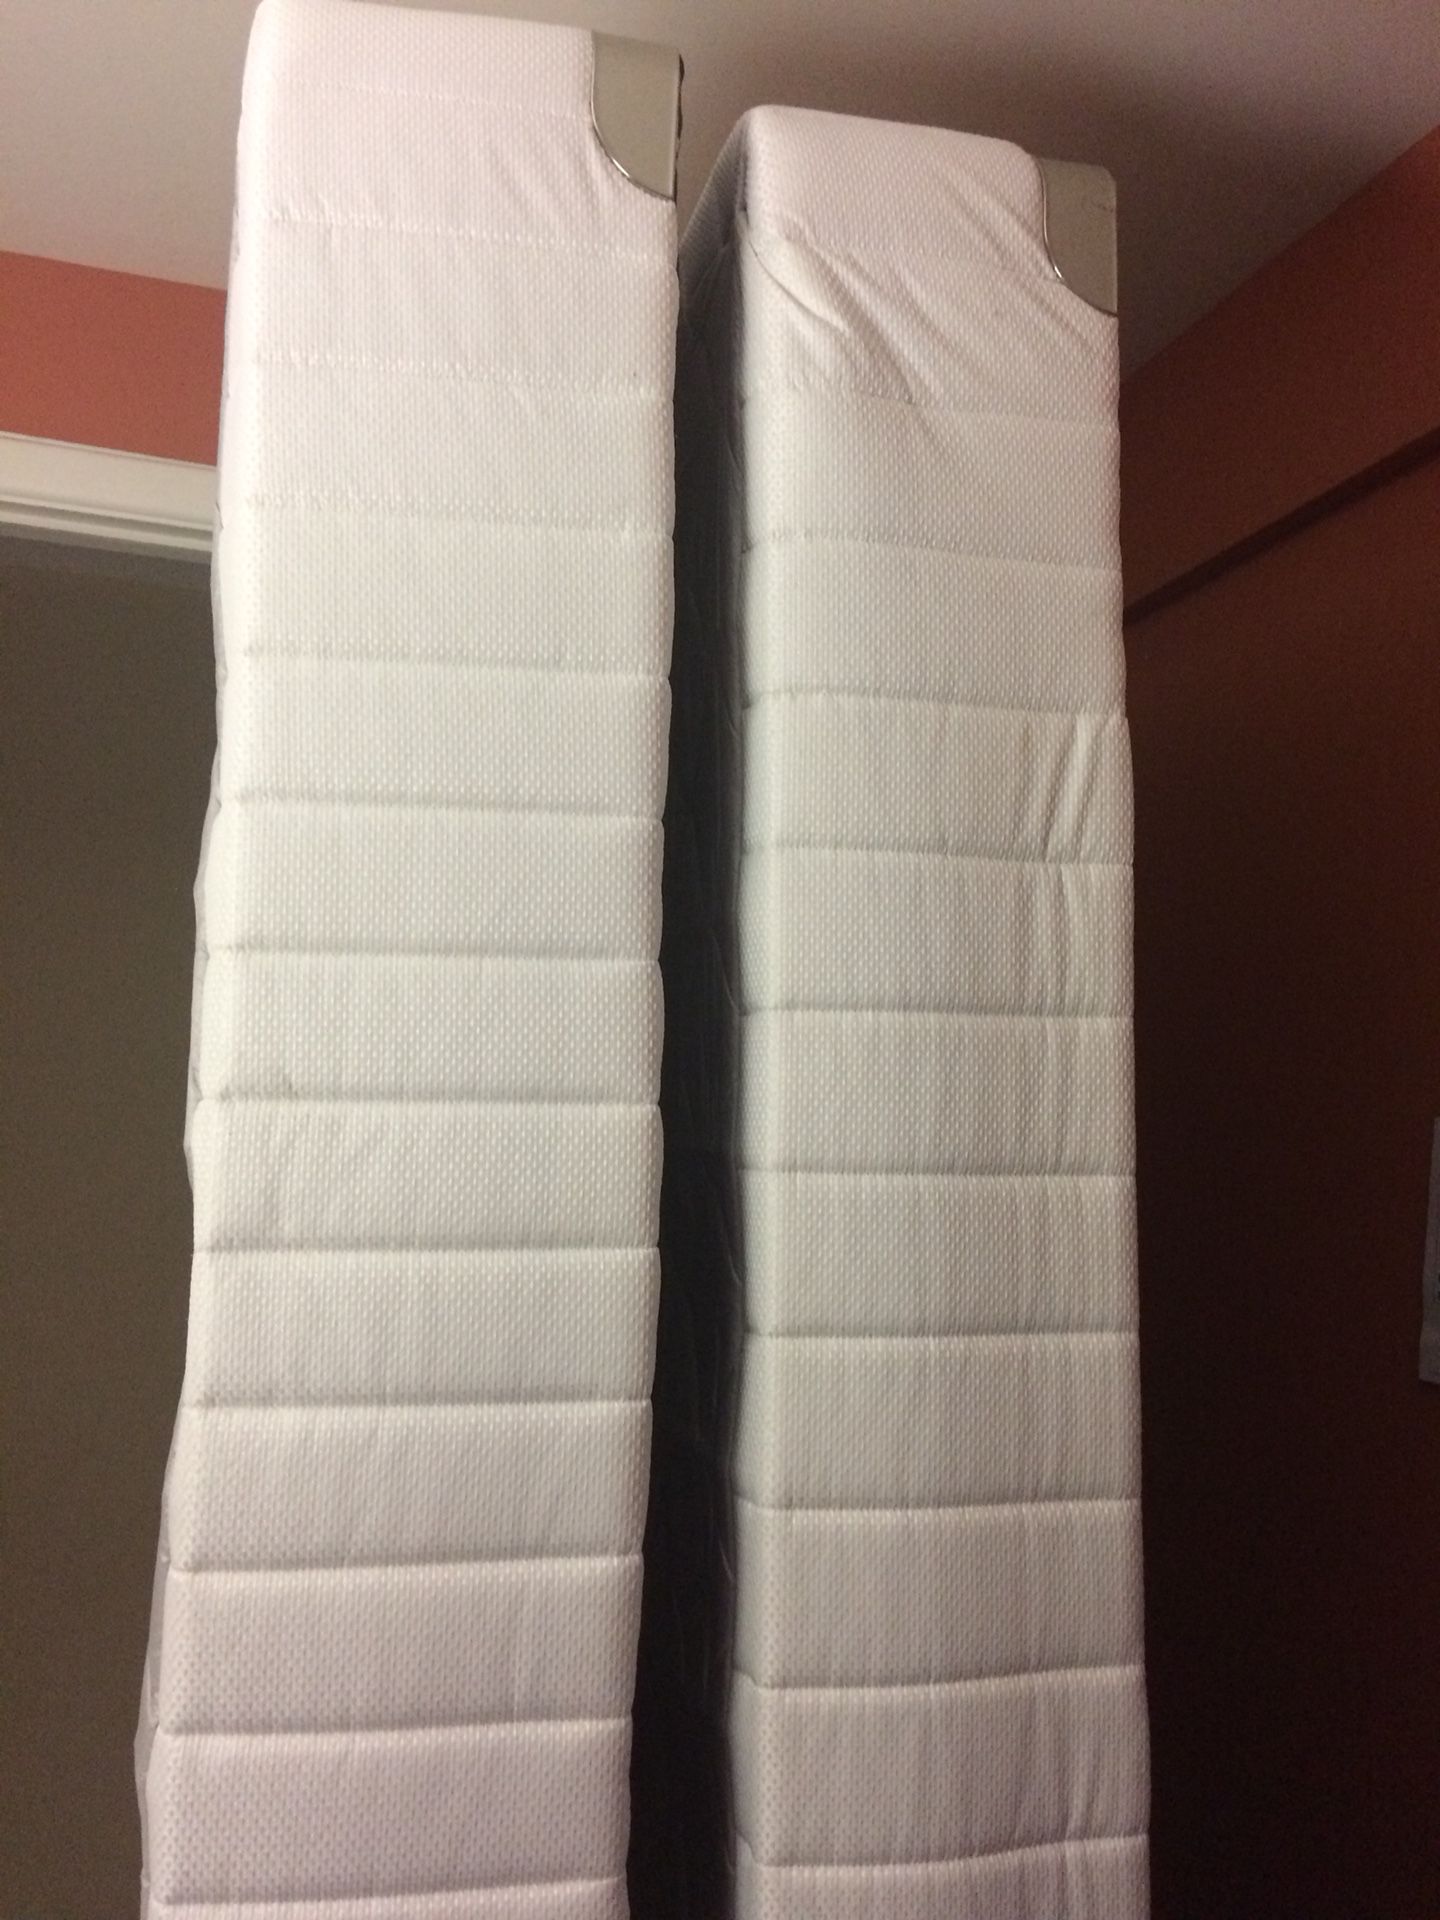 2 twin sized box spring mattresses (2 for king sized bed)